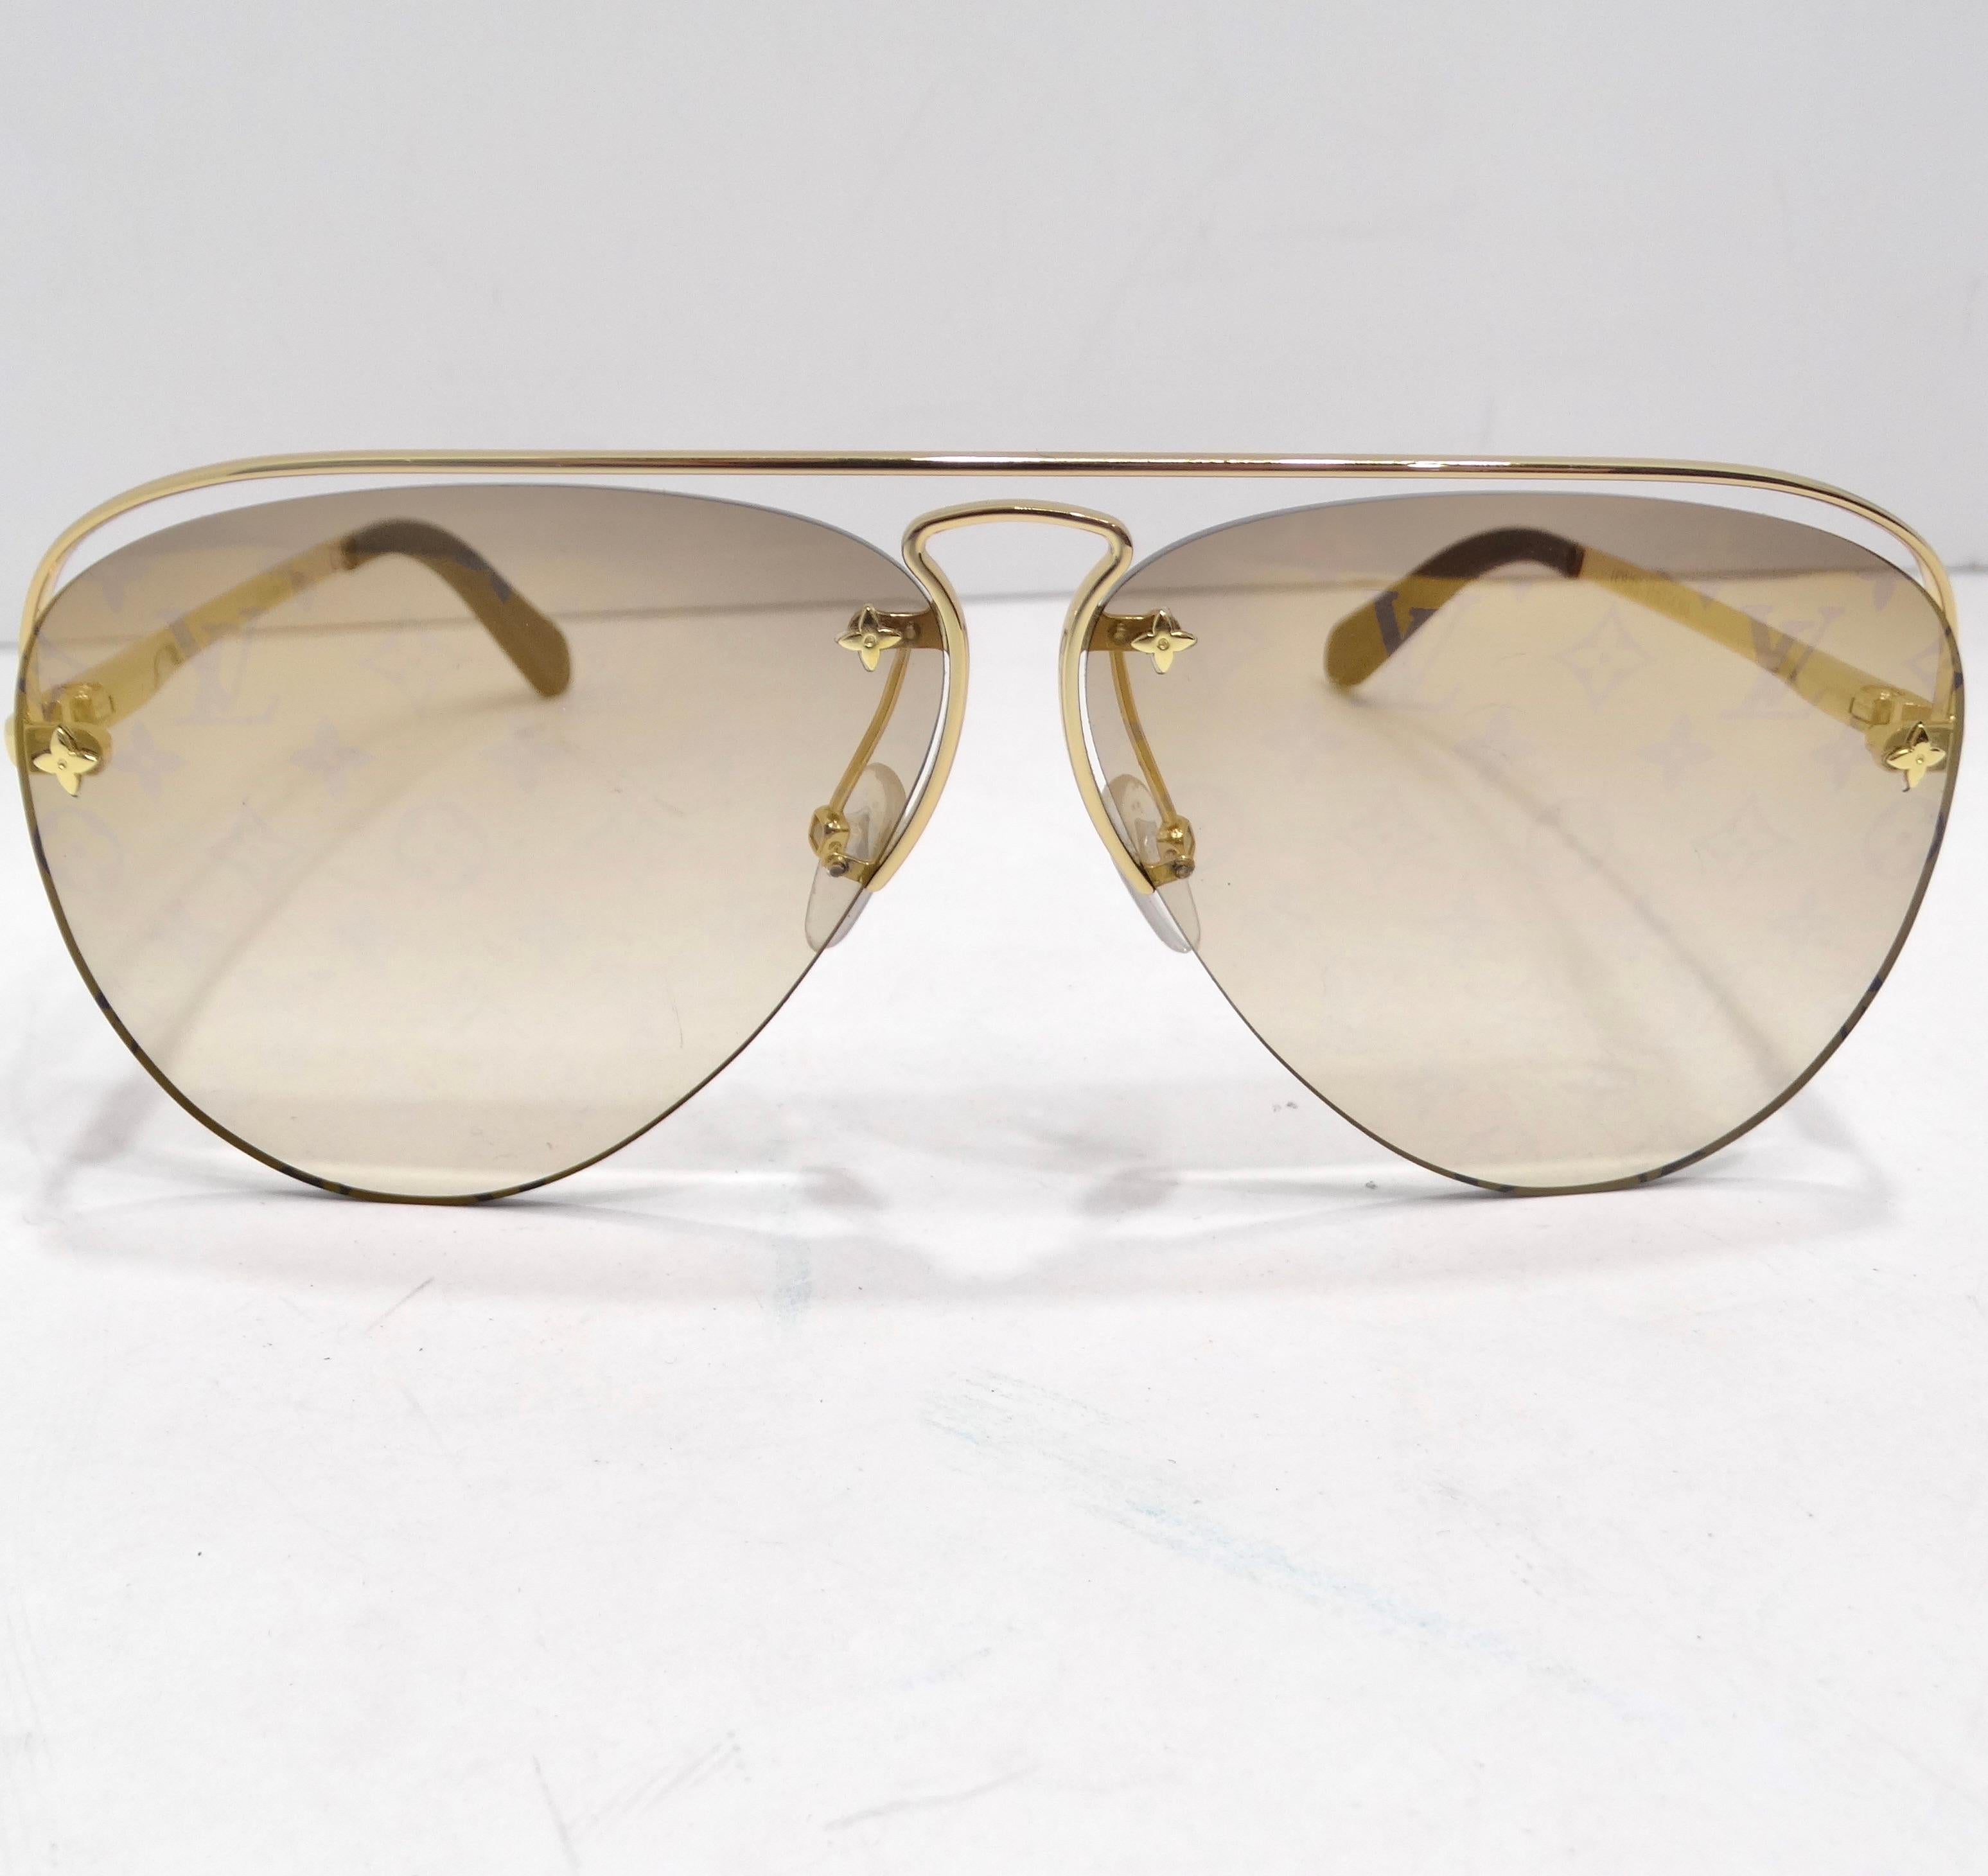 Introducing the Louis Vuitton Monogram Grease Gradient Sunglasses – a harmonious blend of classic aviator style, iconic LV monogram patterns, and elegant detailing. These sunglasses are not just an accessory; they are a chic and timeless statement